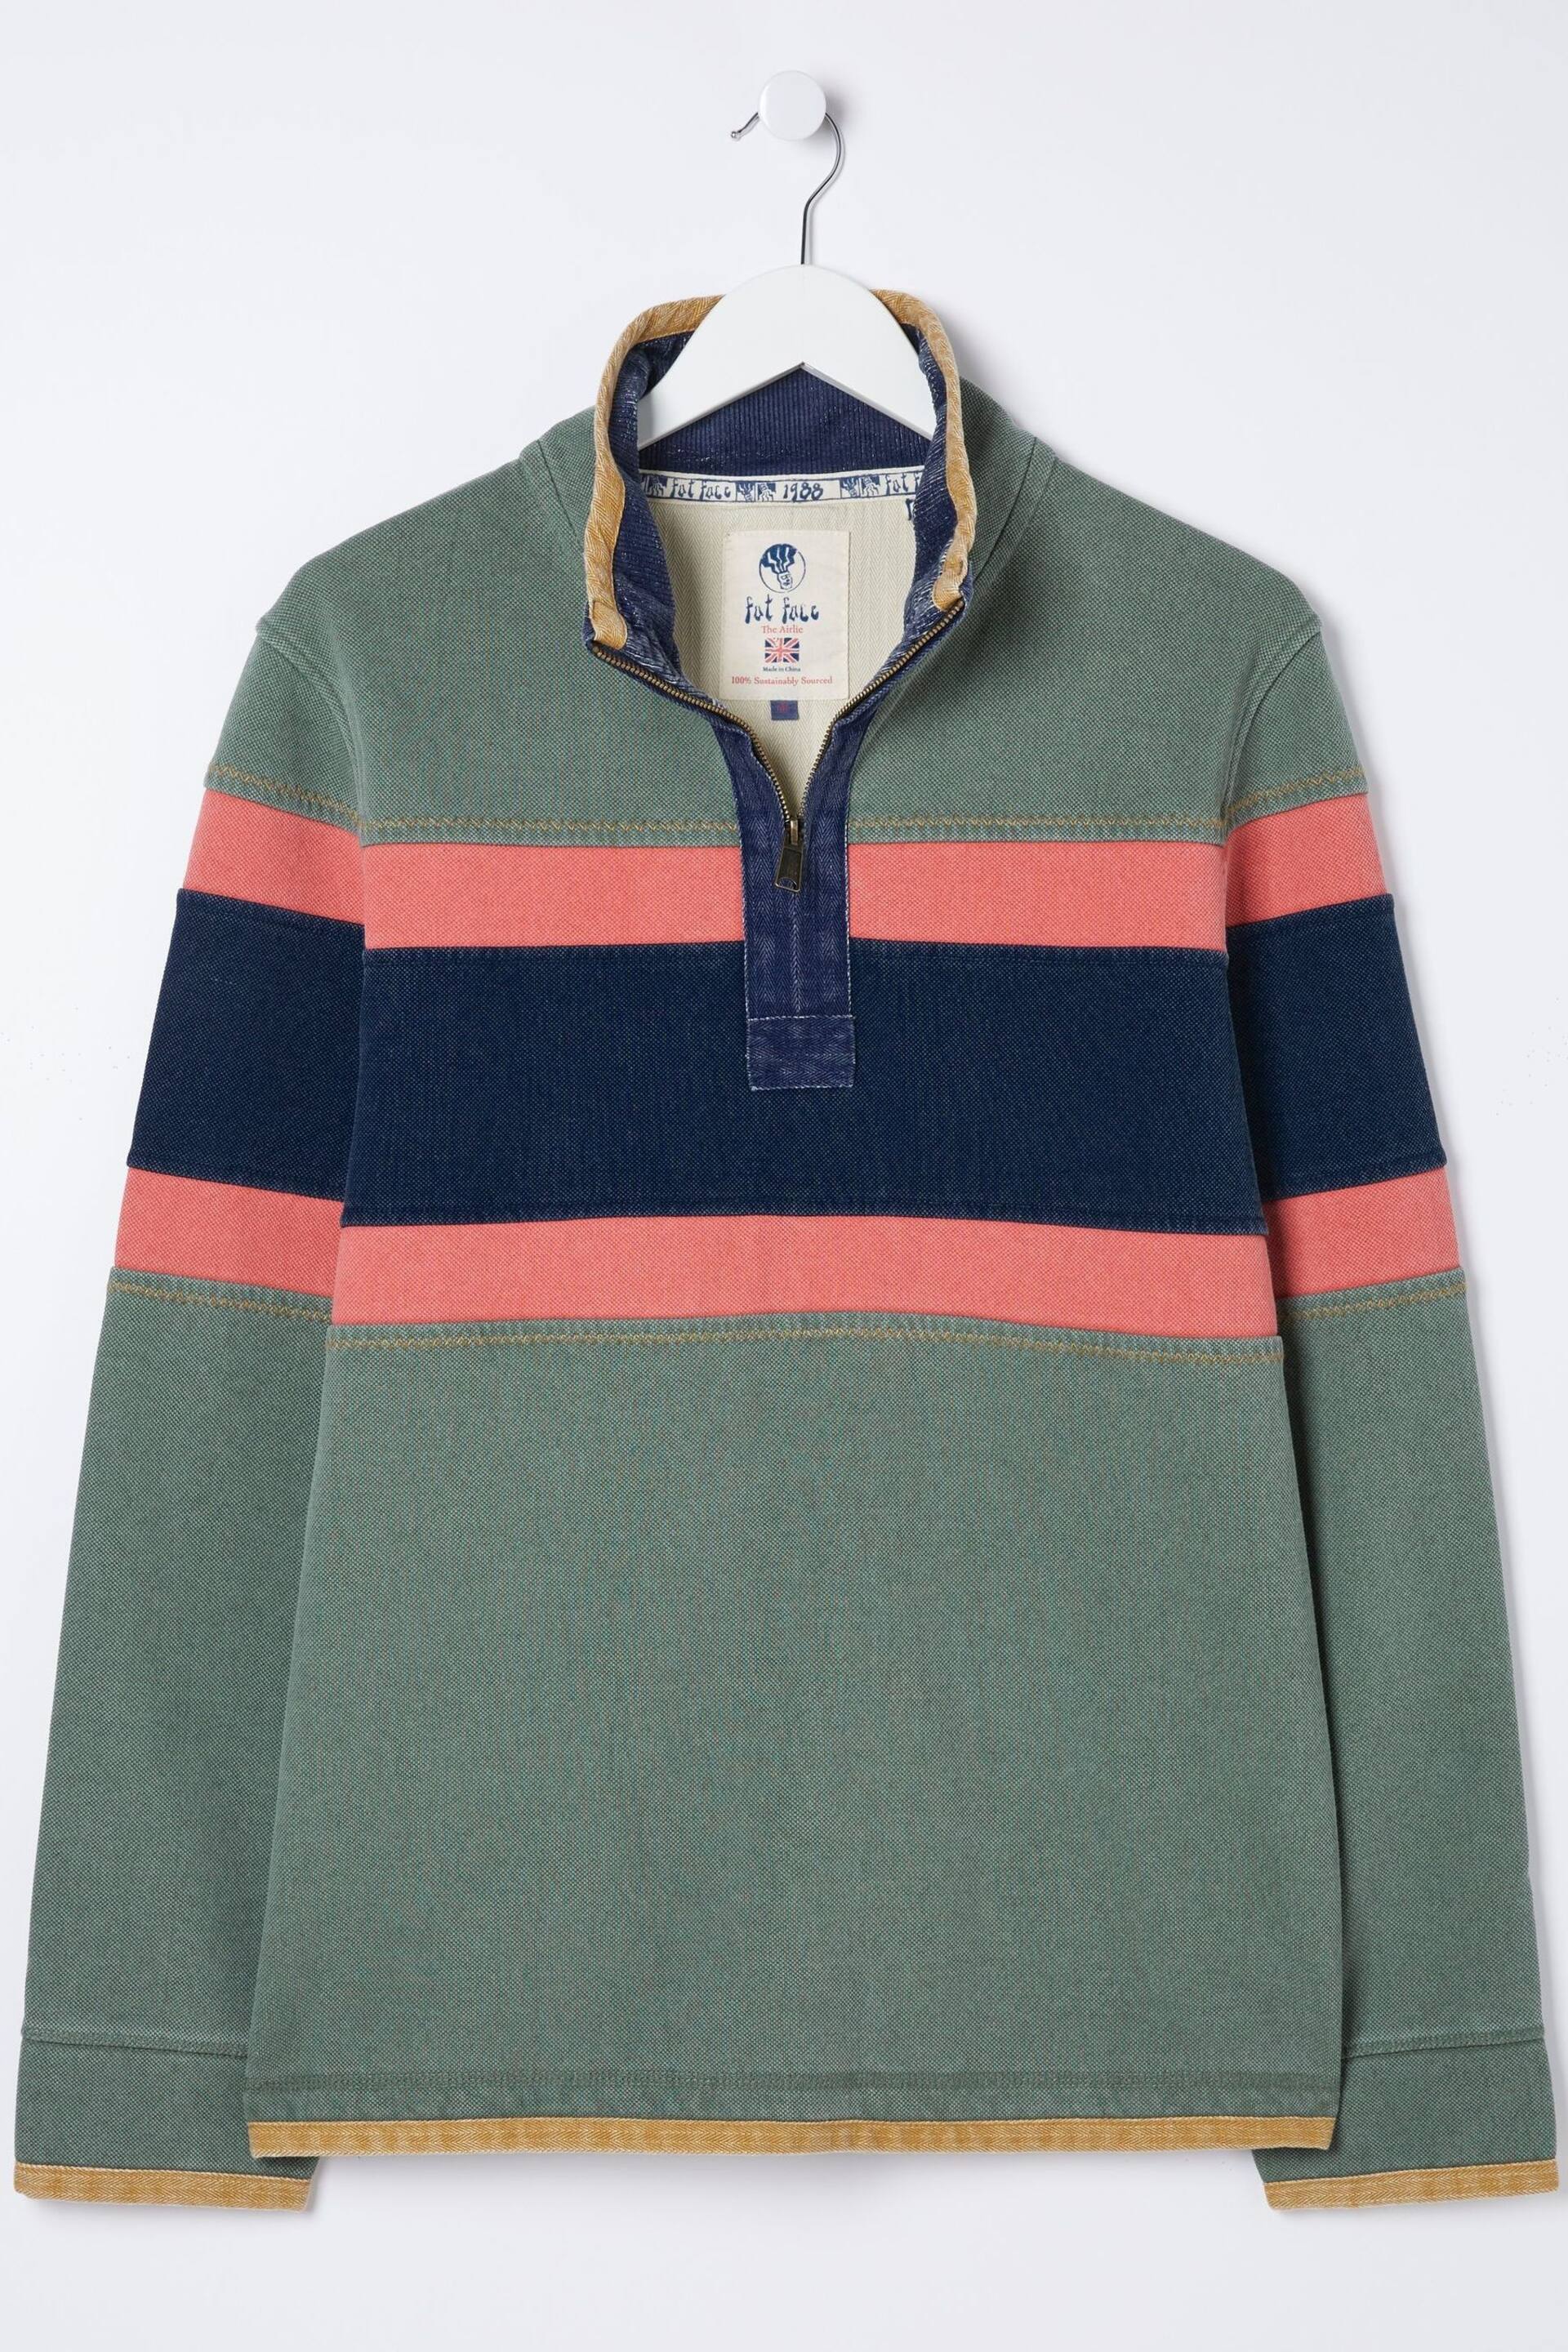 FatFace Green Airlie Chest Stripe Sweatshirt - Image 6 of 6